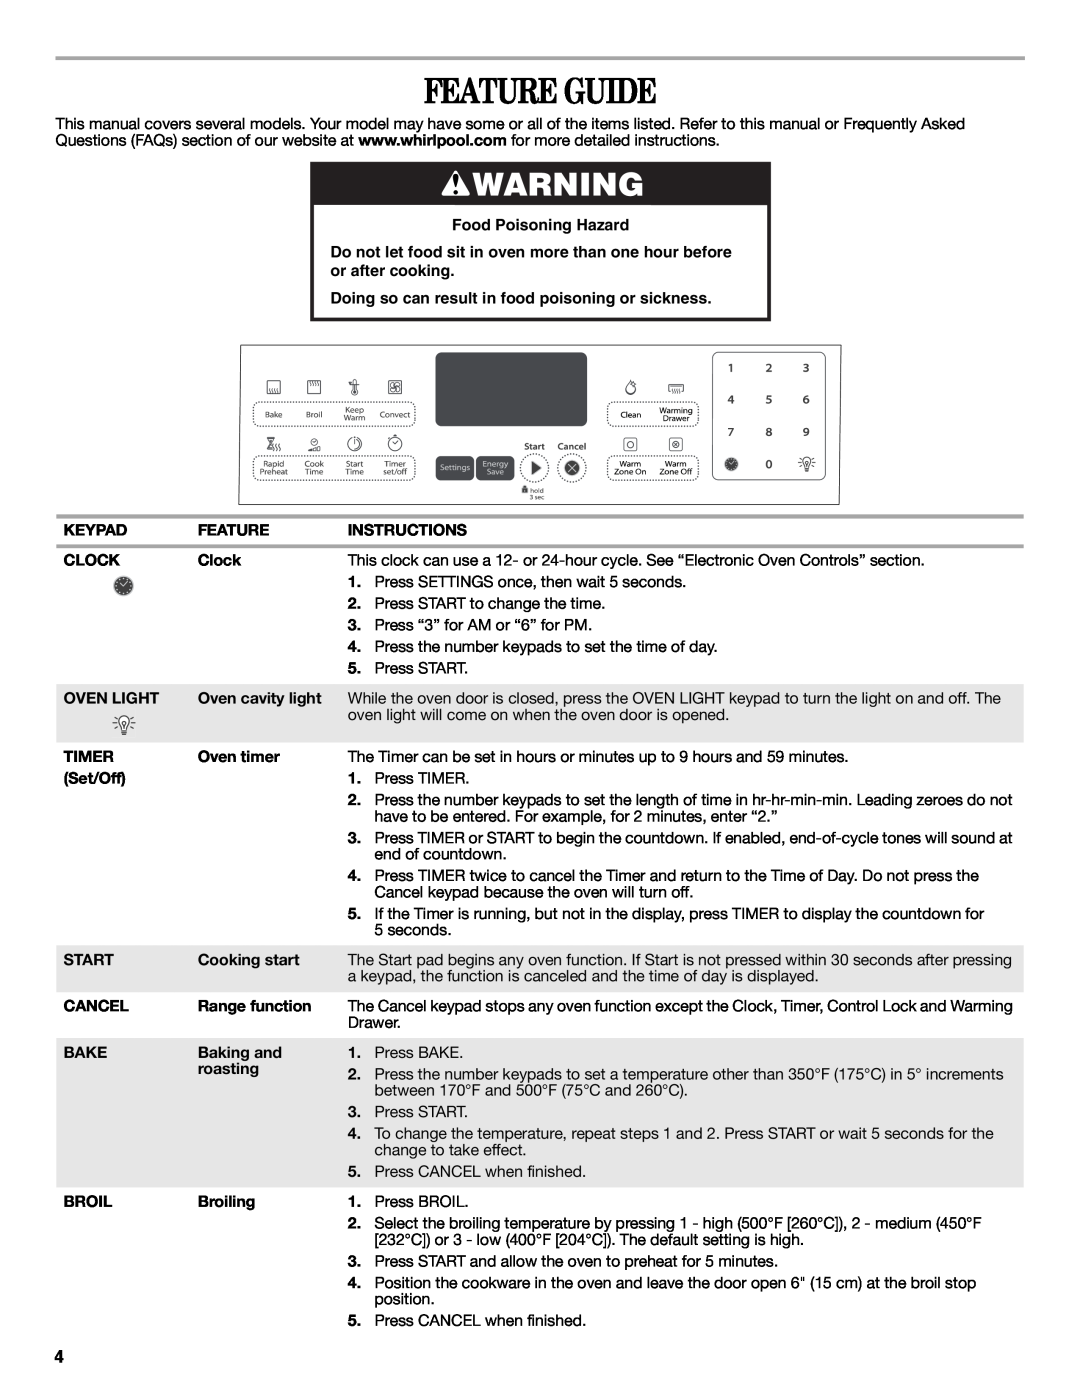 Whirlpool W10392932A warranty Feature Guide, Food Poisoning Hazard, Doing so can result in food poisoning or sickness 